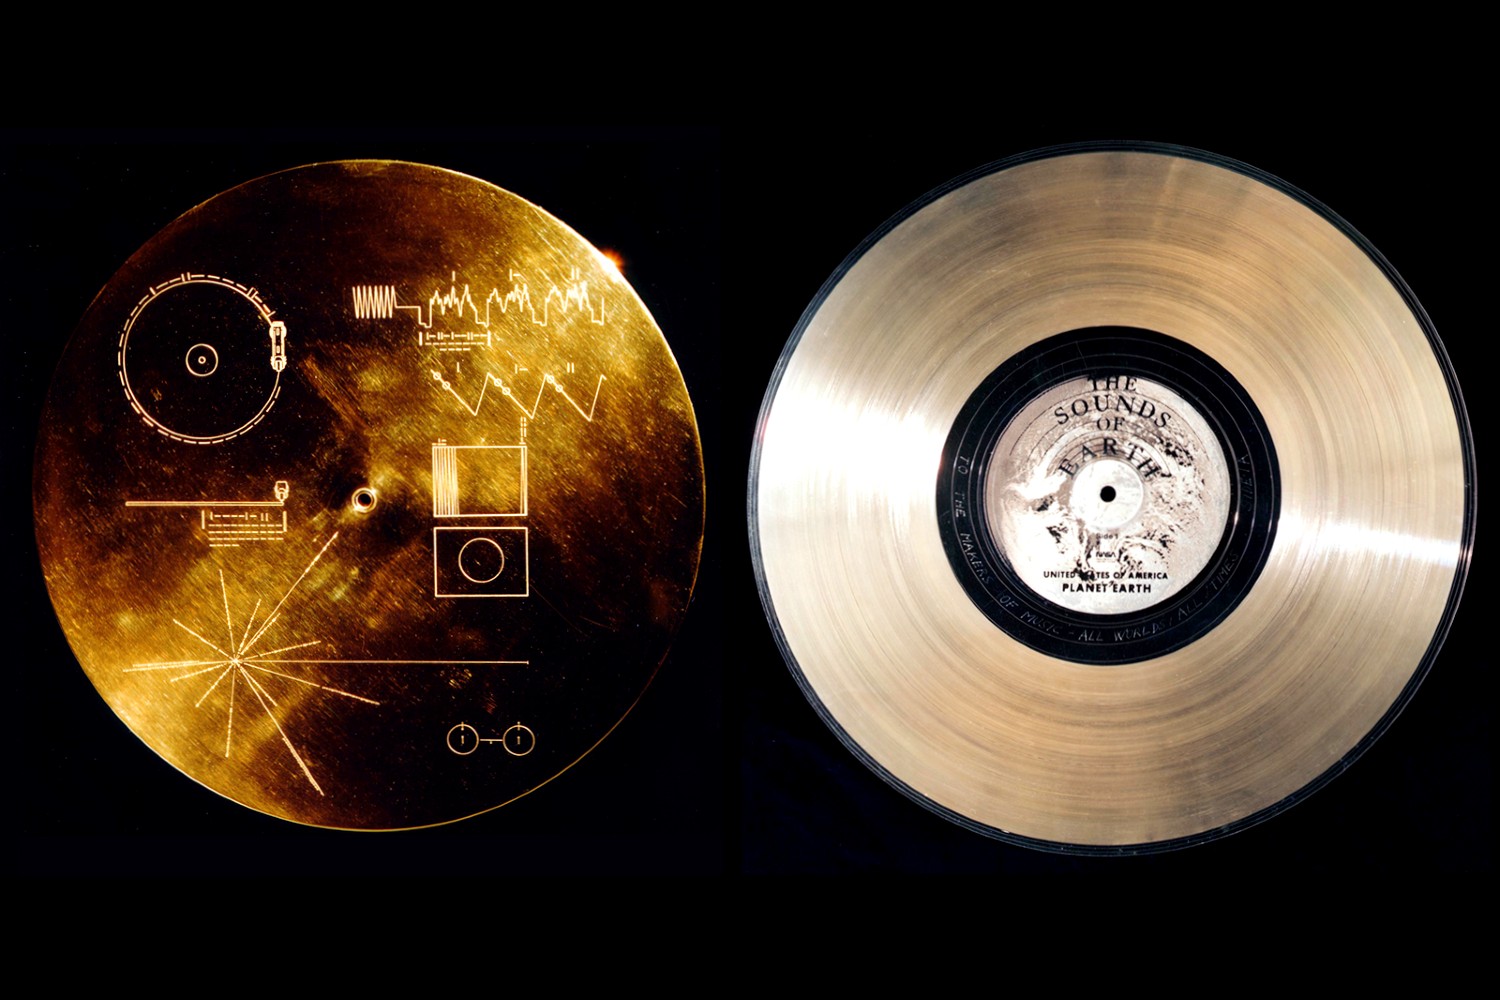 The Golden Record, a Summary of the Human Race Floating Through Space